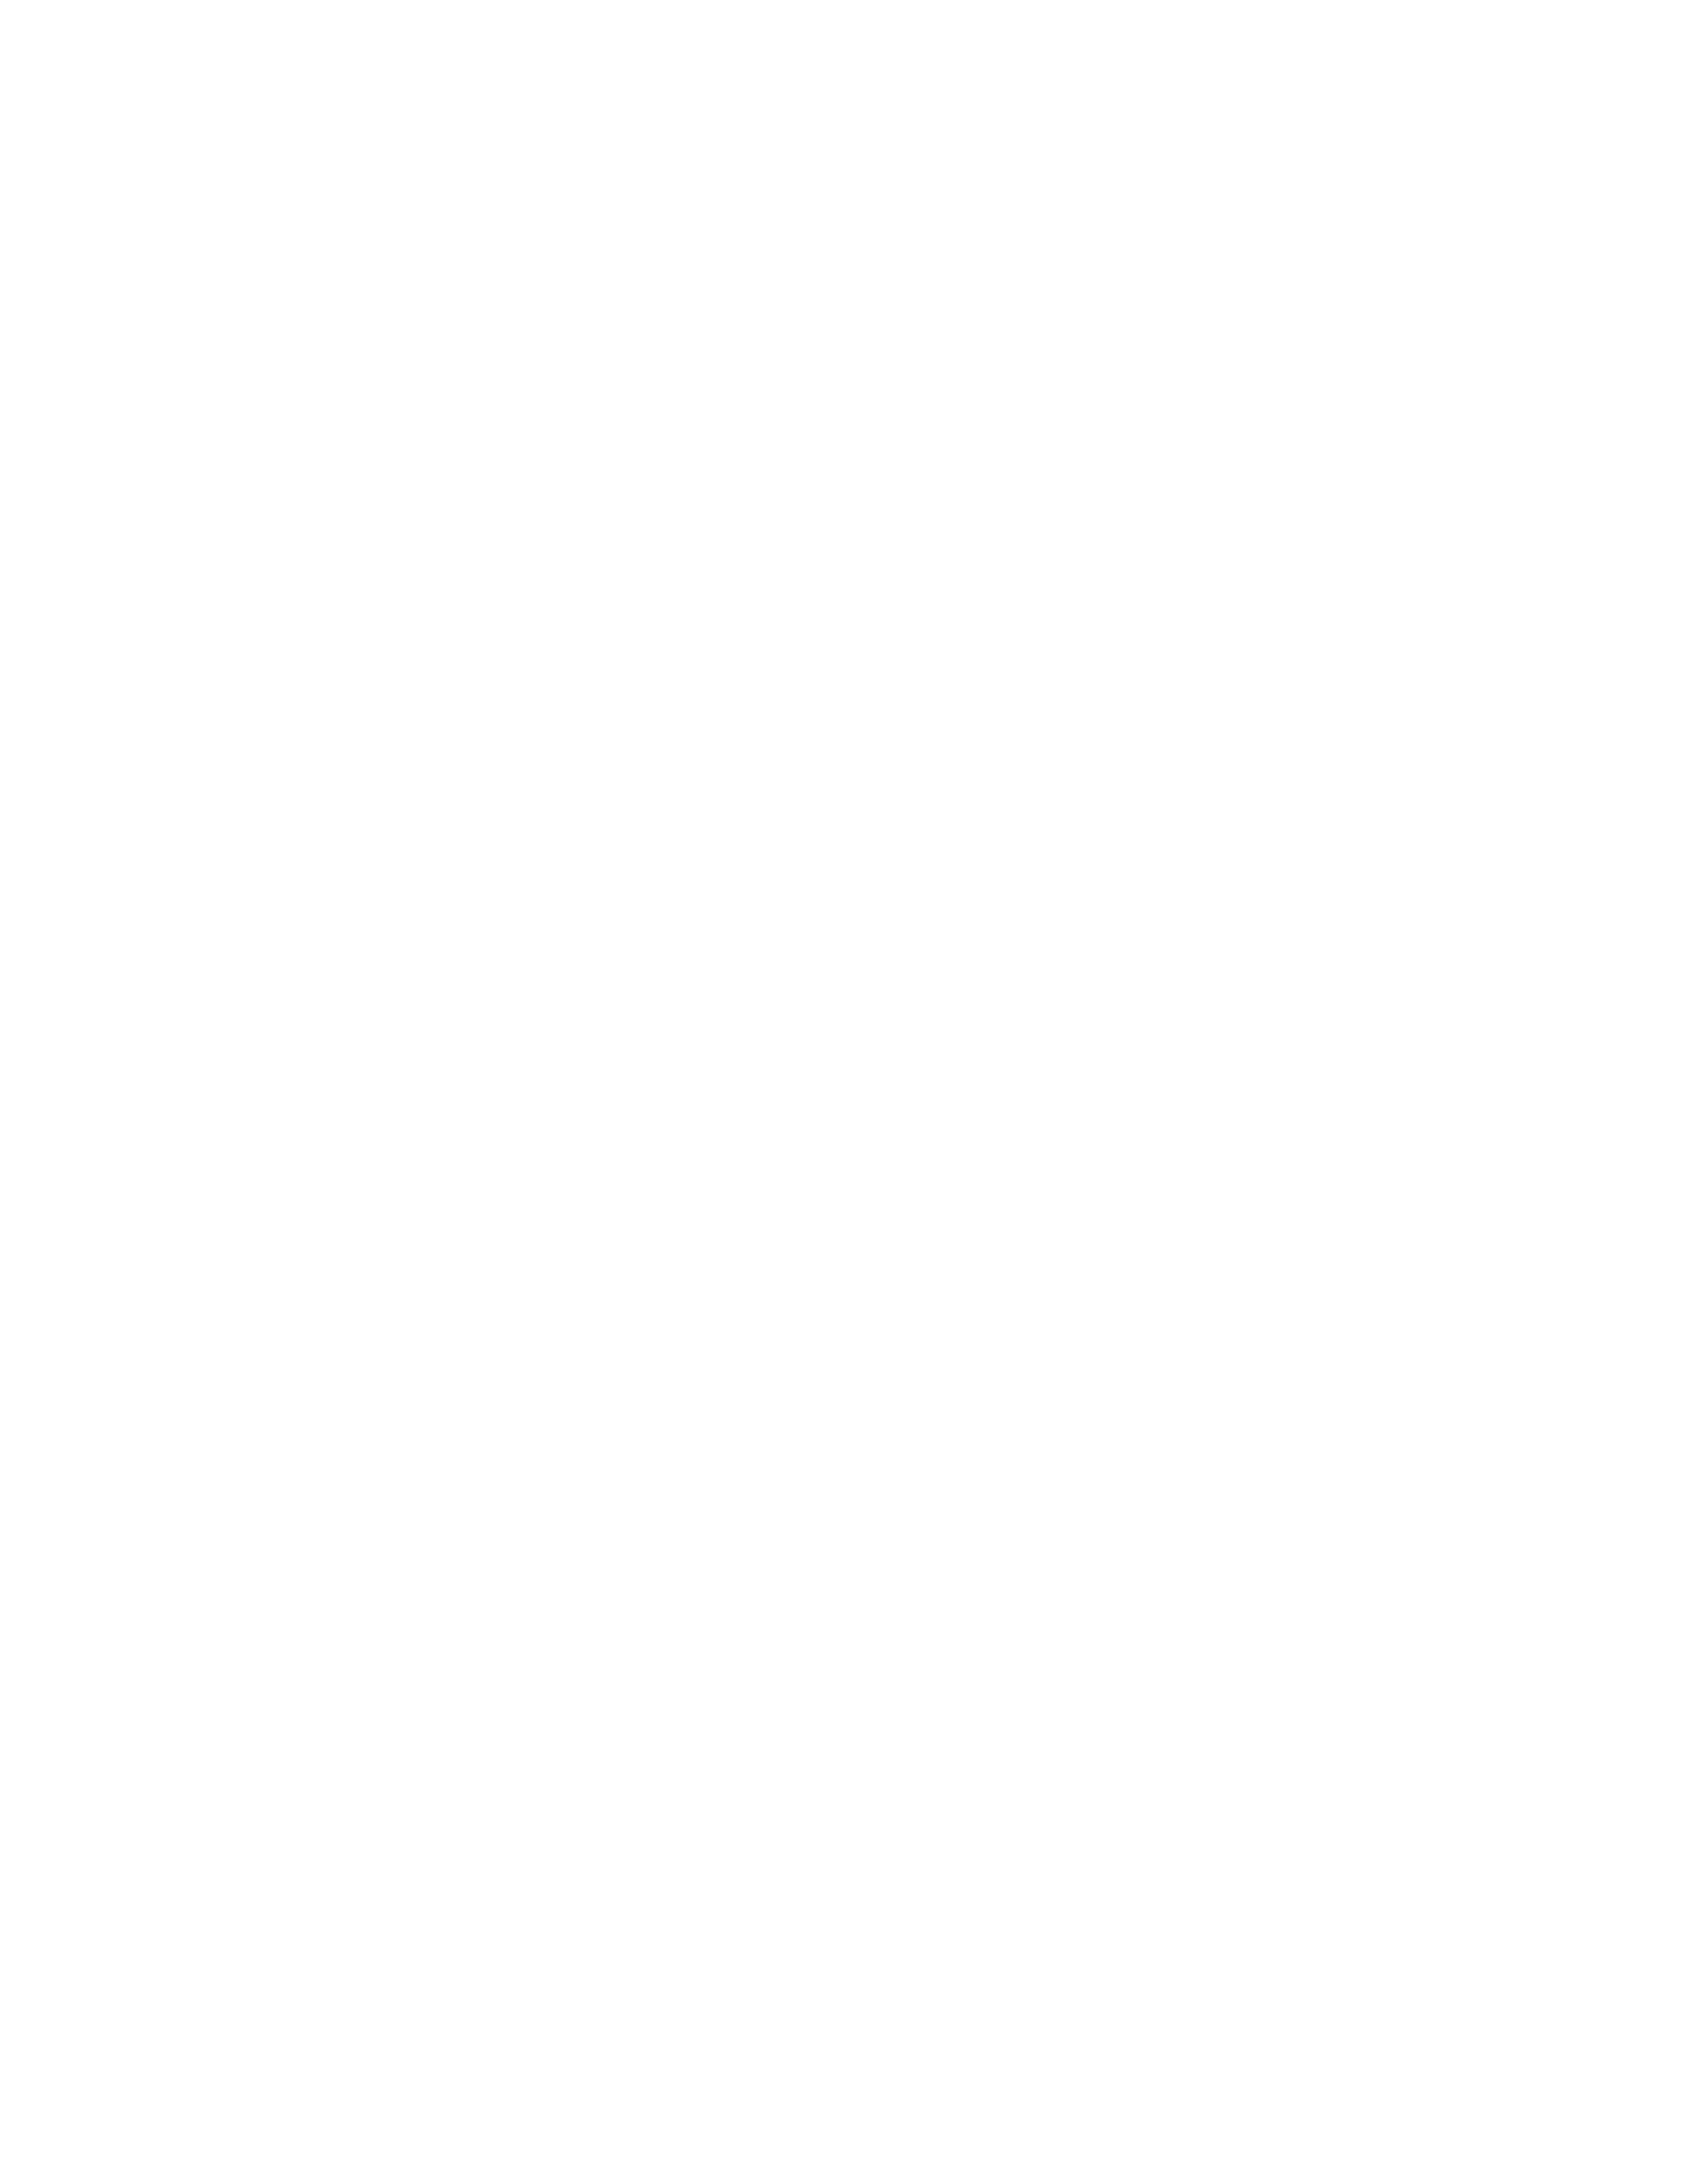 Driftwood Delights